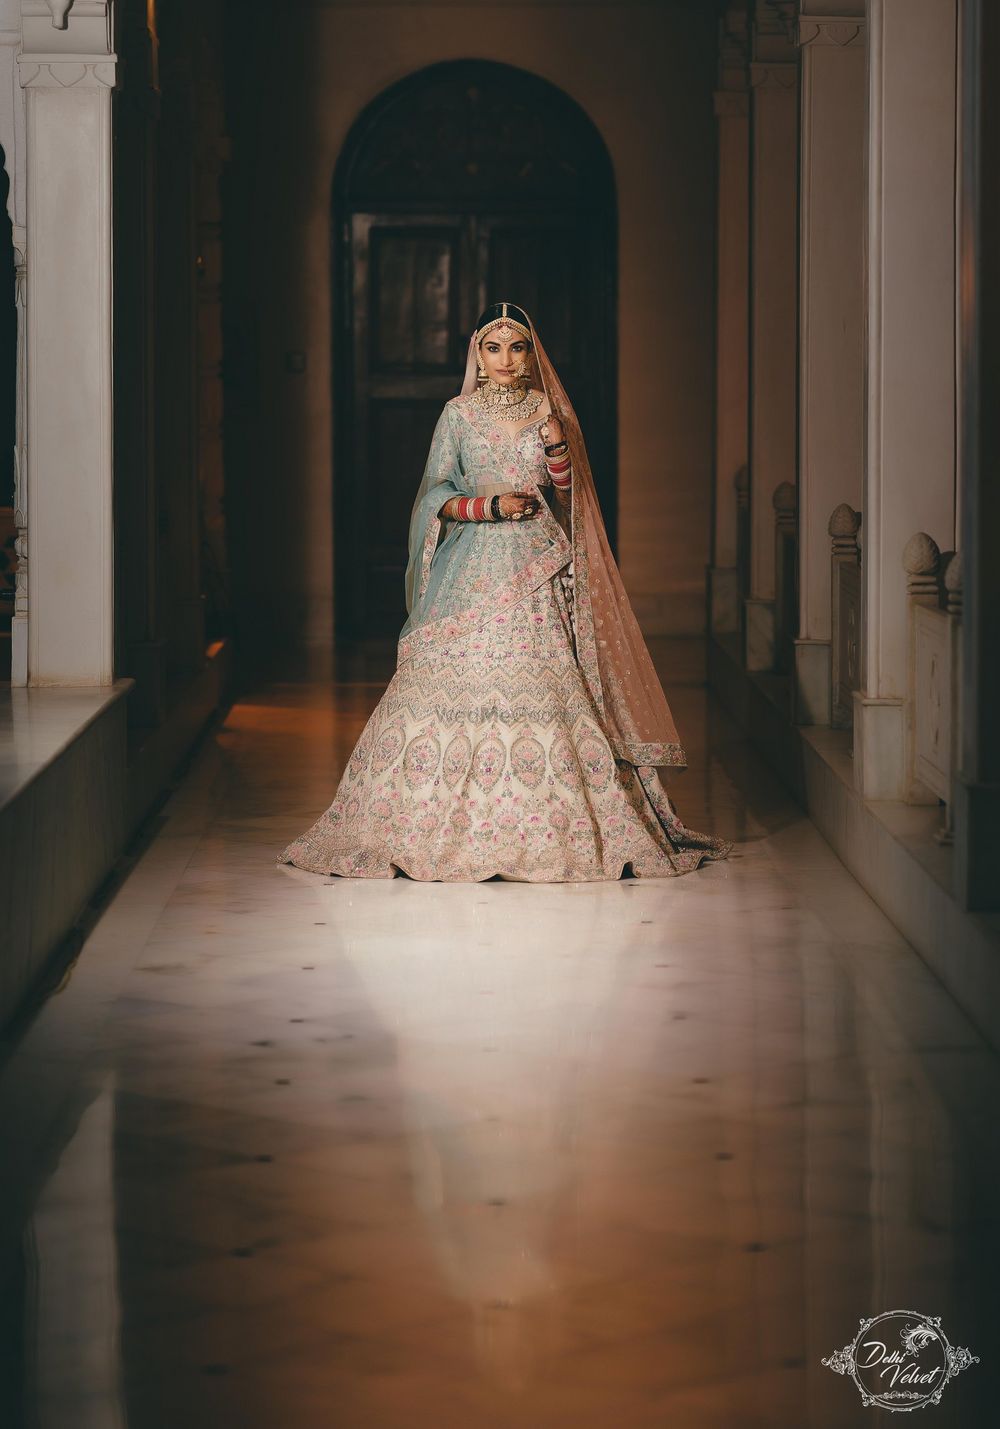 Photo of An elegant bride in a beautiful pastel lehenga on her wedding day.